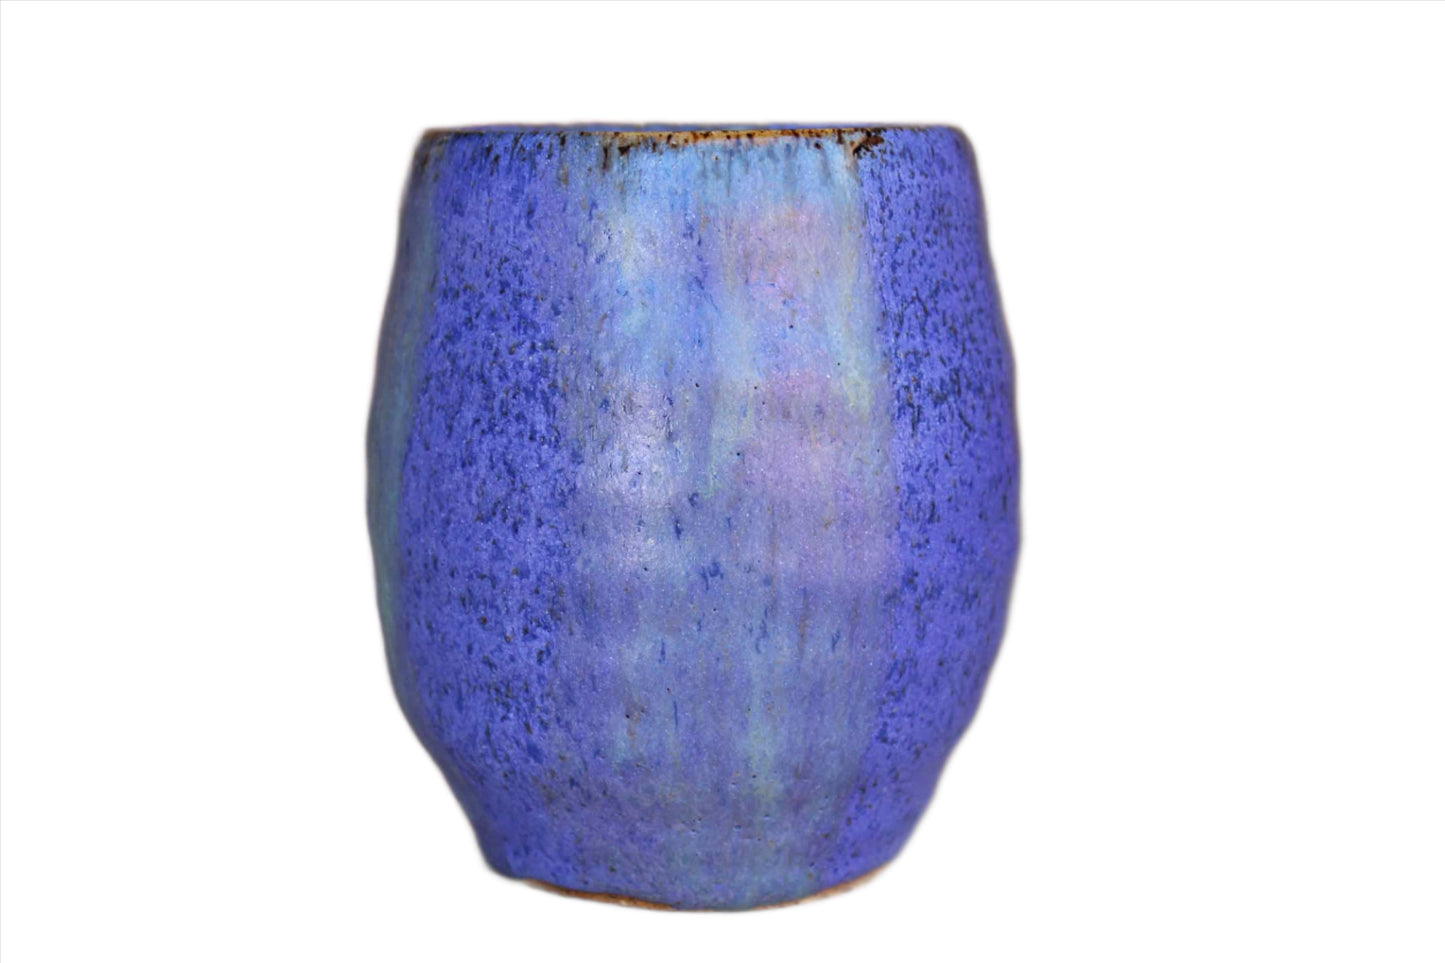 Speckled Blue Stoneware Storage Vessel with Wash of Light Green